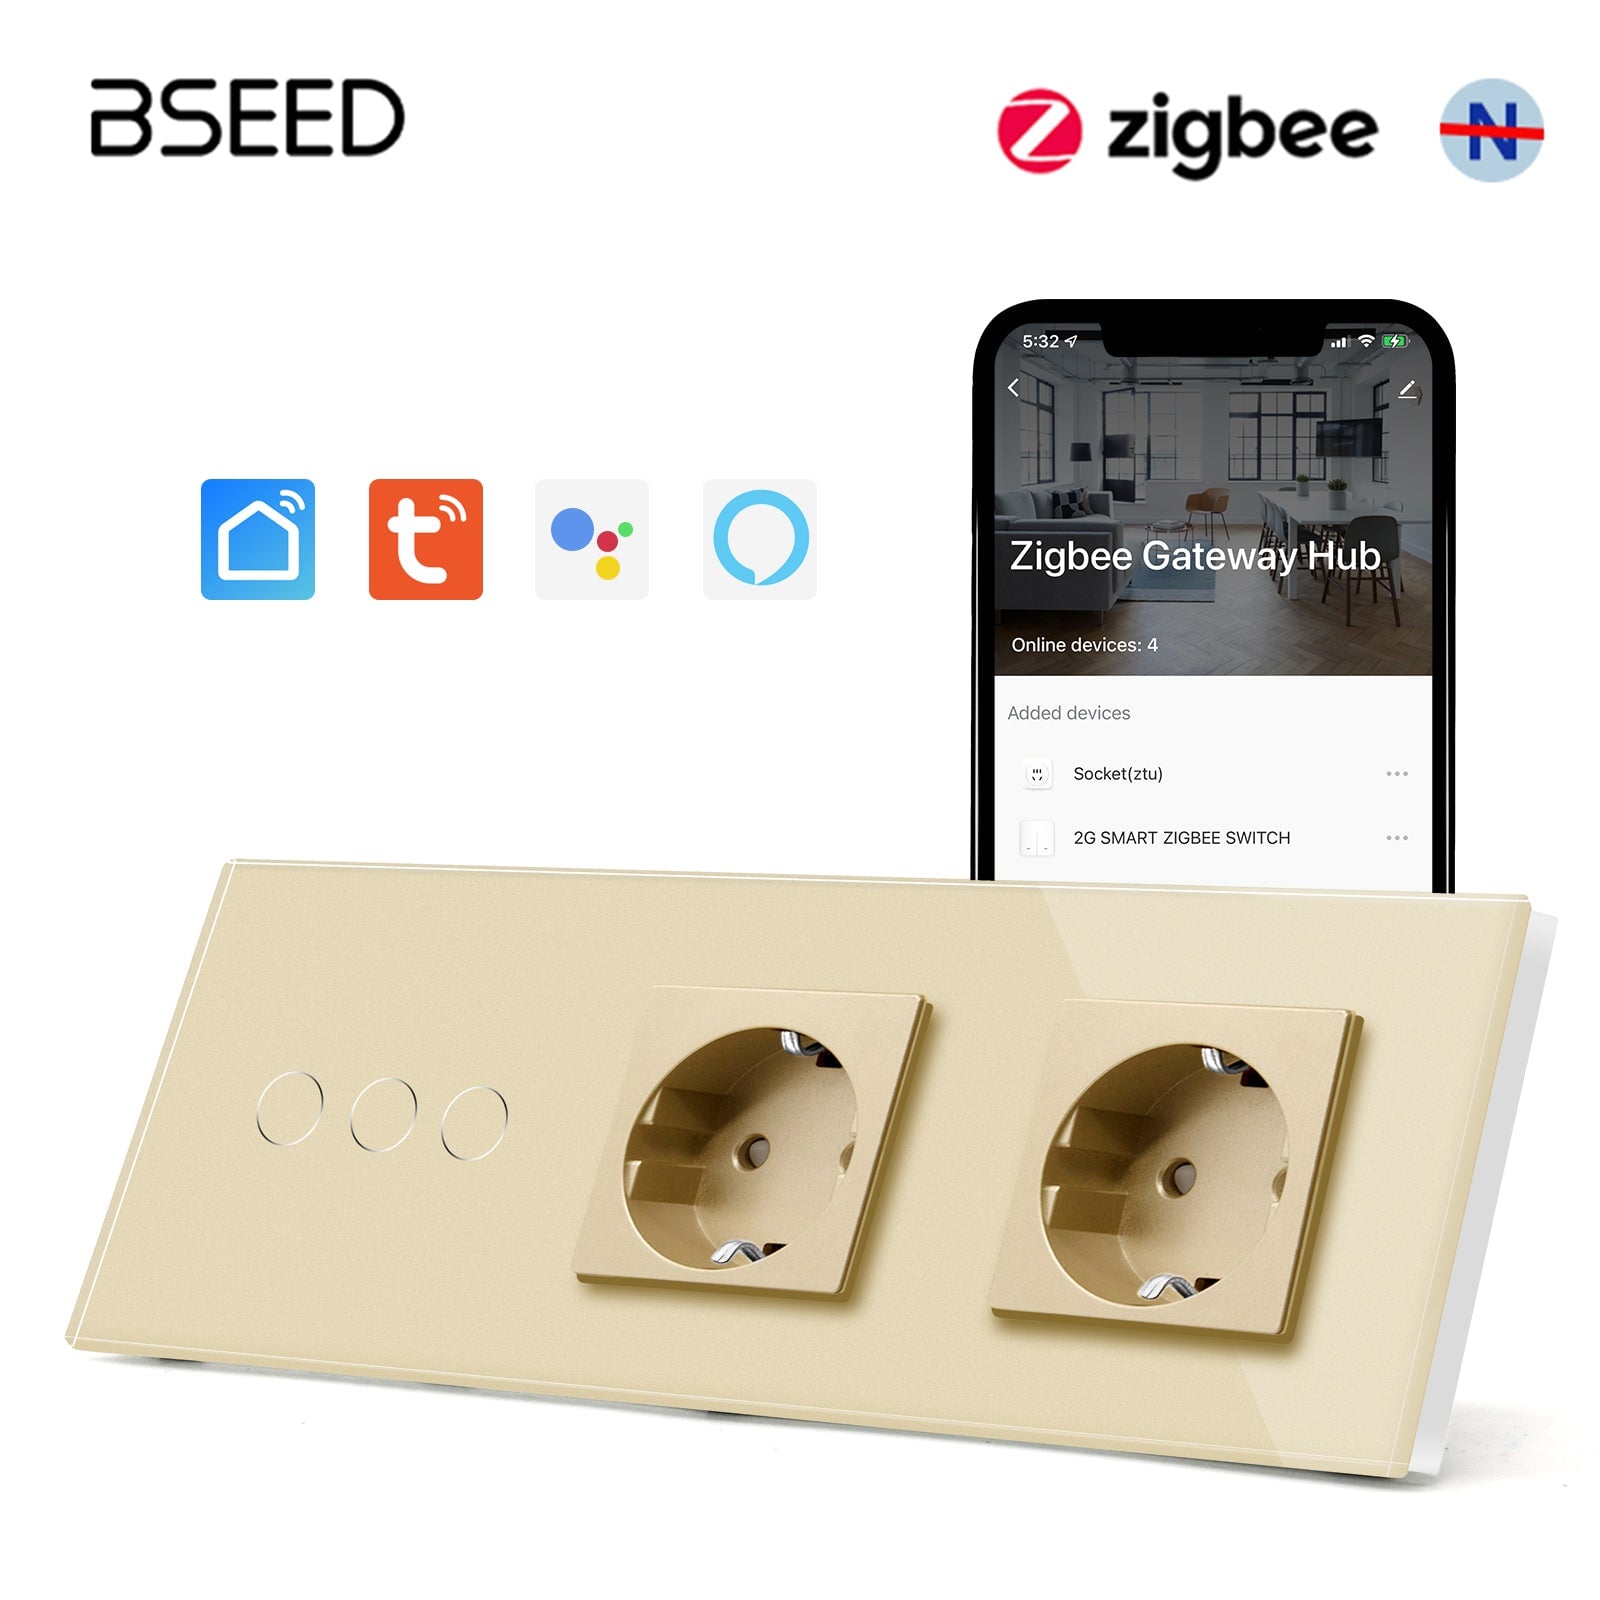 Bseed Zigbee Touch 1/2/3 Gang Light Switches Single Live Line Multi Control With Double EU Standard Not Smart Wall Sockets Light Switches Bseedswitch Golden 3Gang 